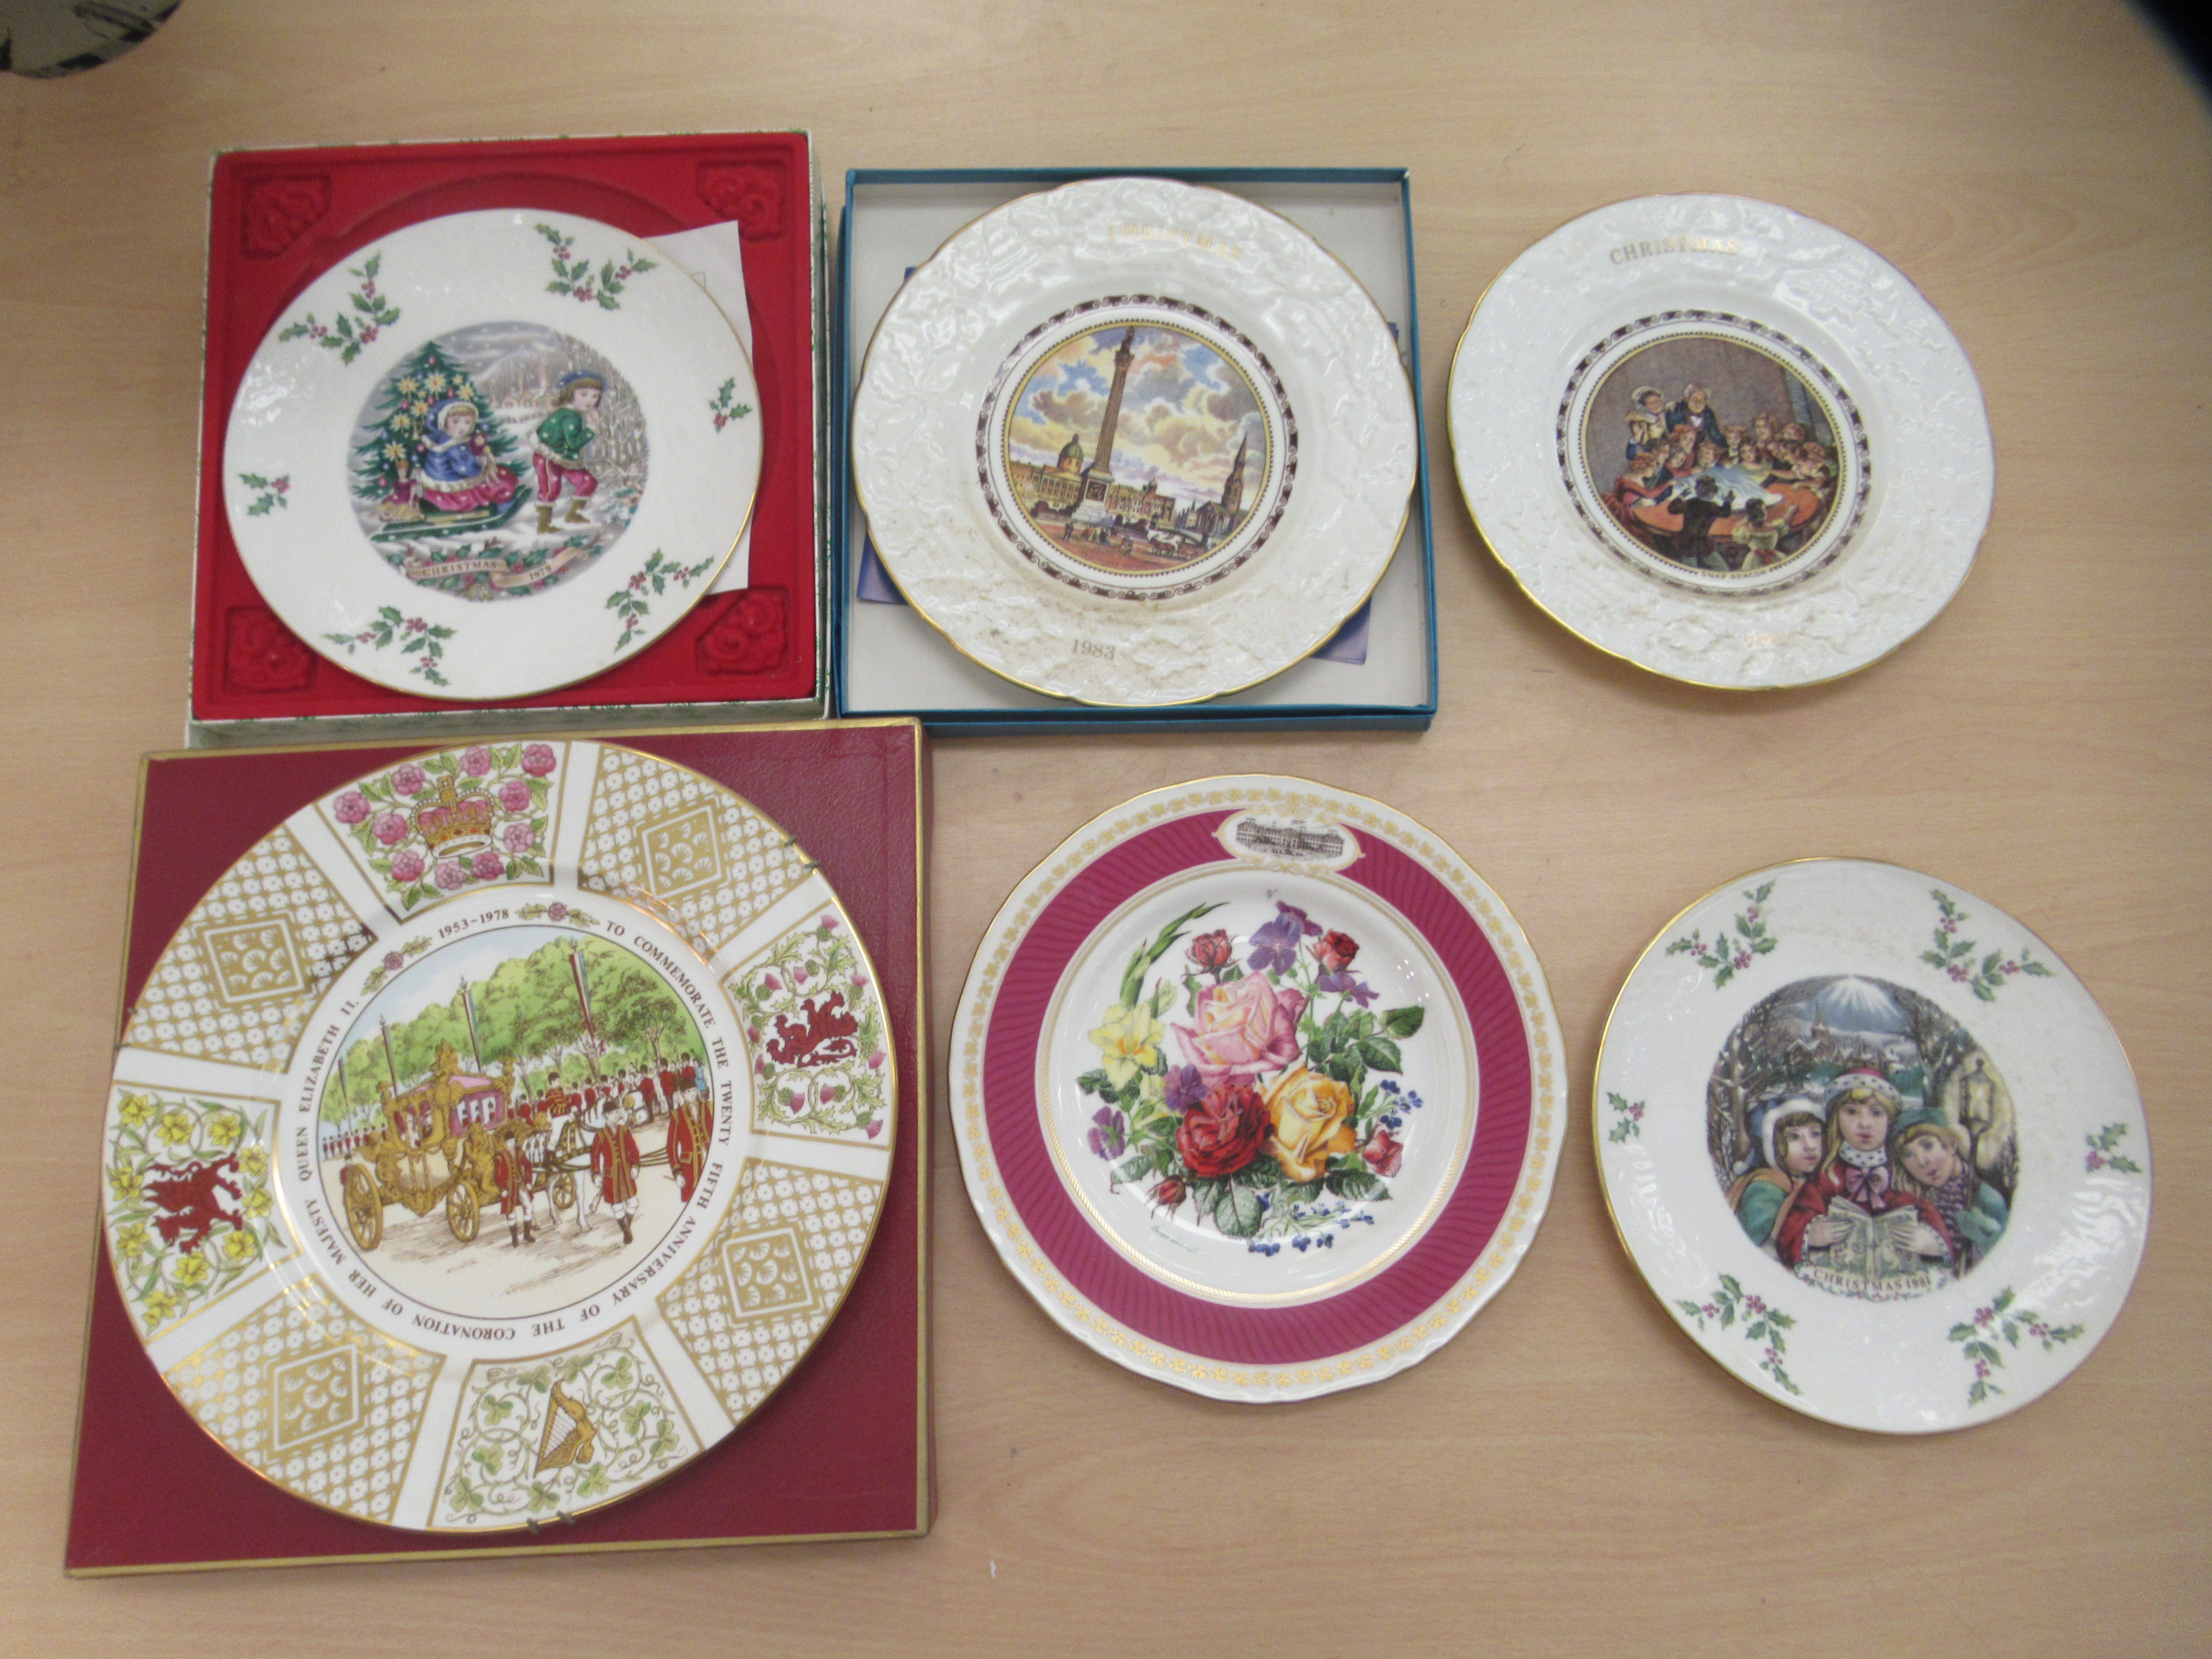 Decorative ceramics, mainly plates with examples by Coalport and Royal Doulton  9"-11"dia  some - Image 3 of 5